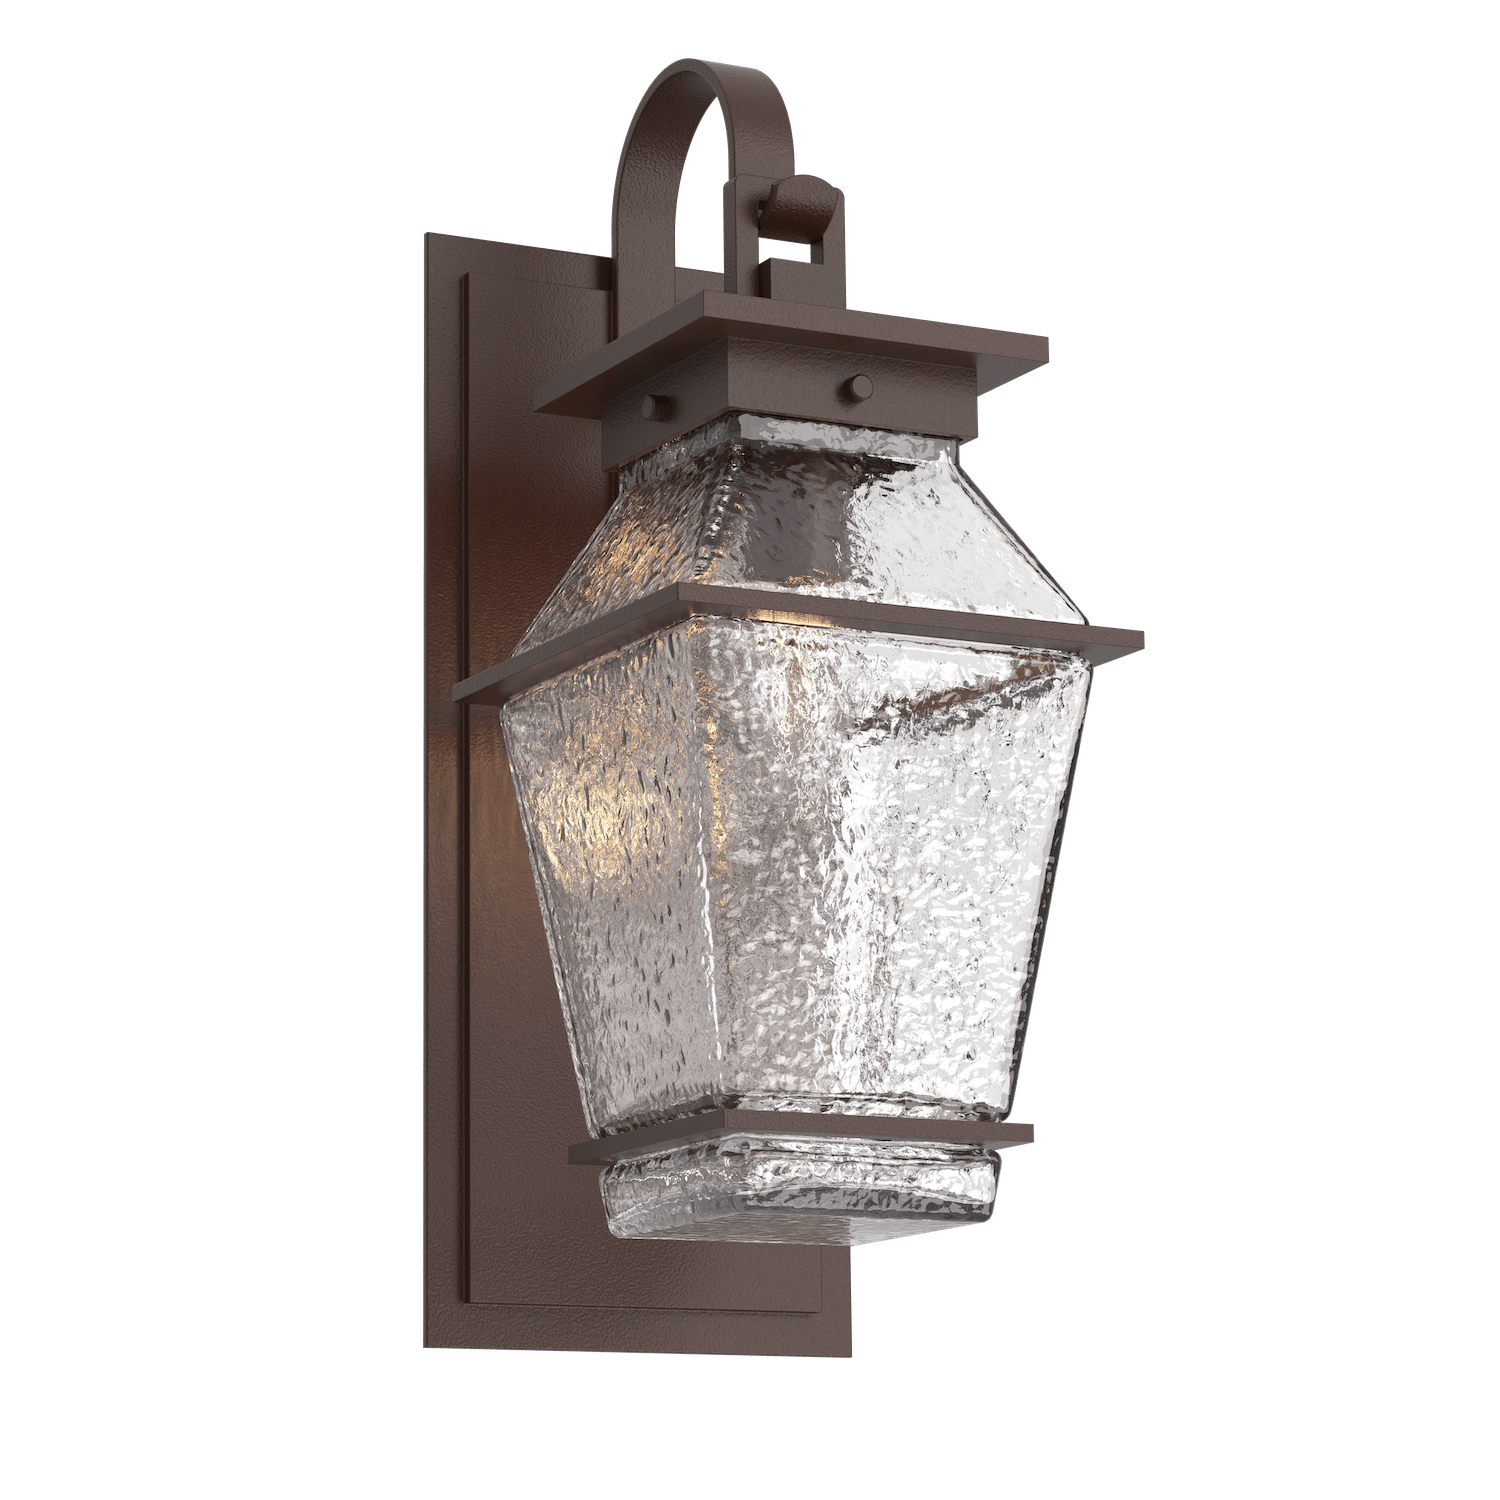 ODB0077-02-SB-C-Hammerton-Studio-Landmark-19-inch-outdoor-sconce-with-shepherds-hook-with-statuary-bronze-finish-and-clear-blown-glass-shades-and-incandescent-lamping